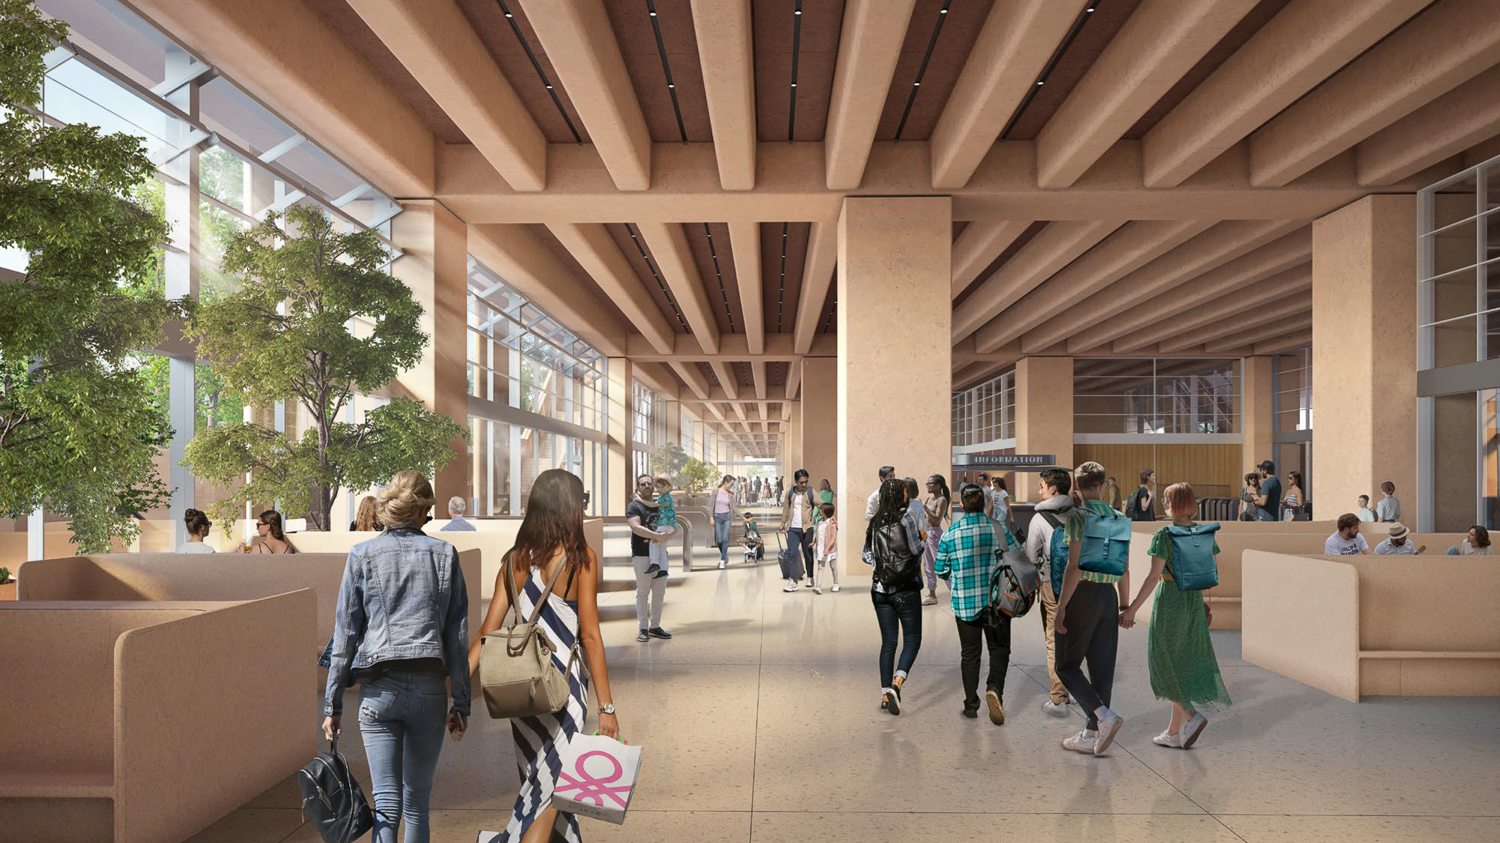 Merced Station concourse, rendering by Foster + Partners